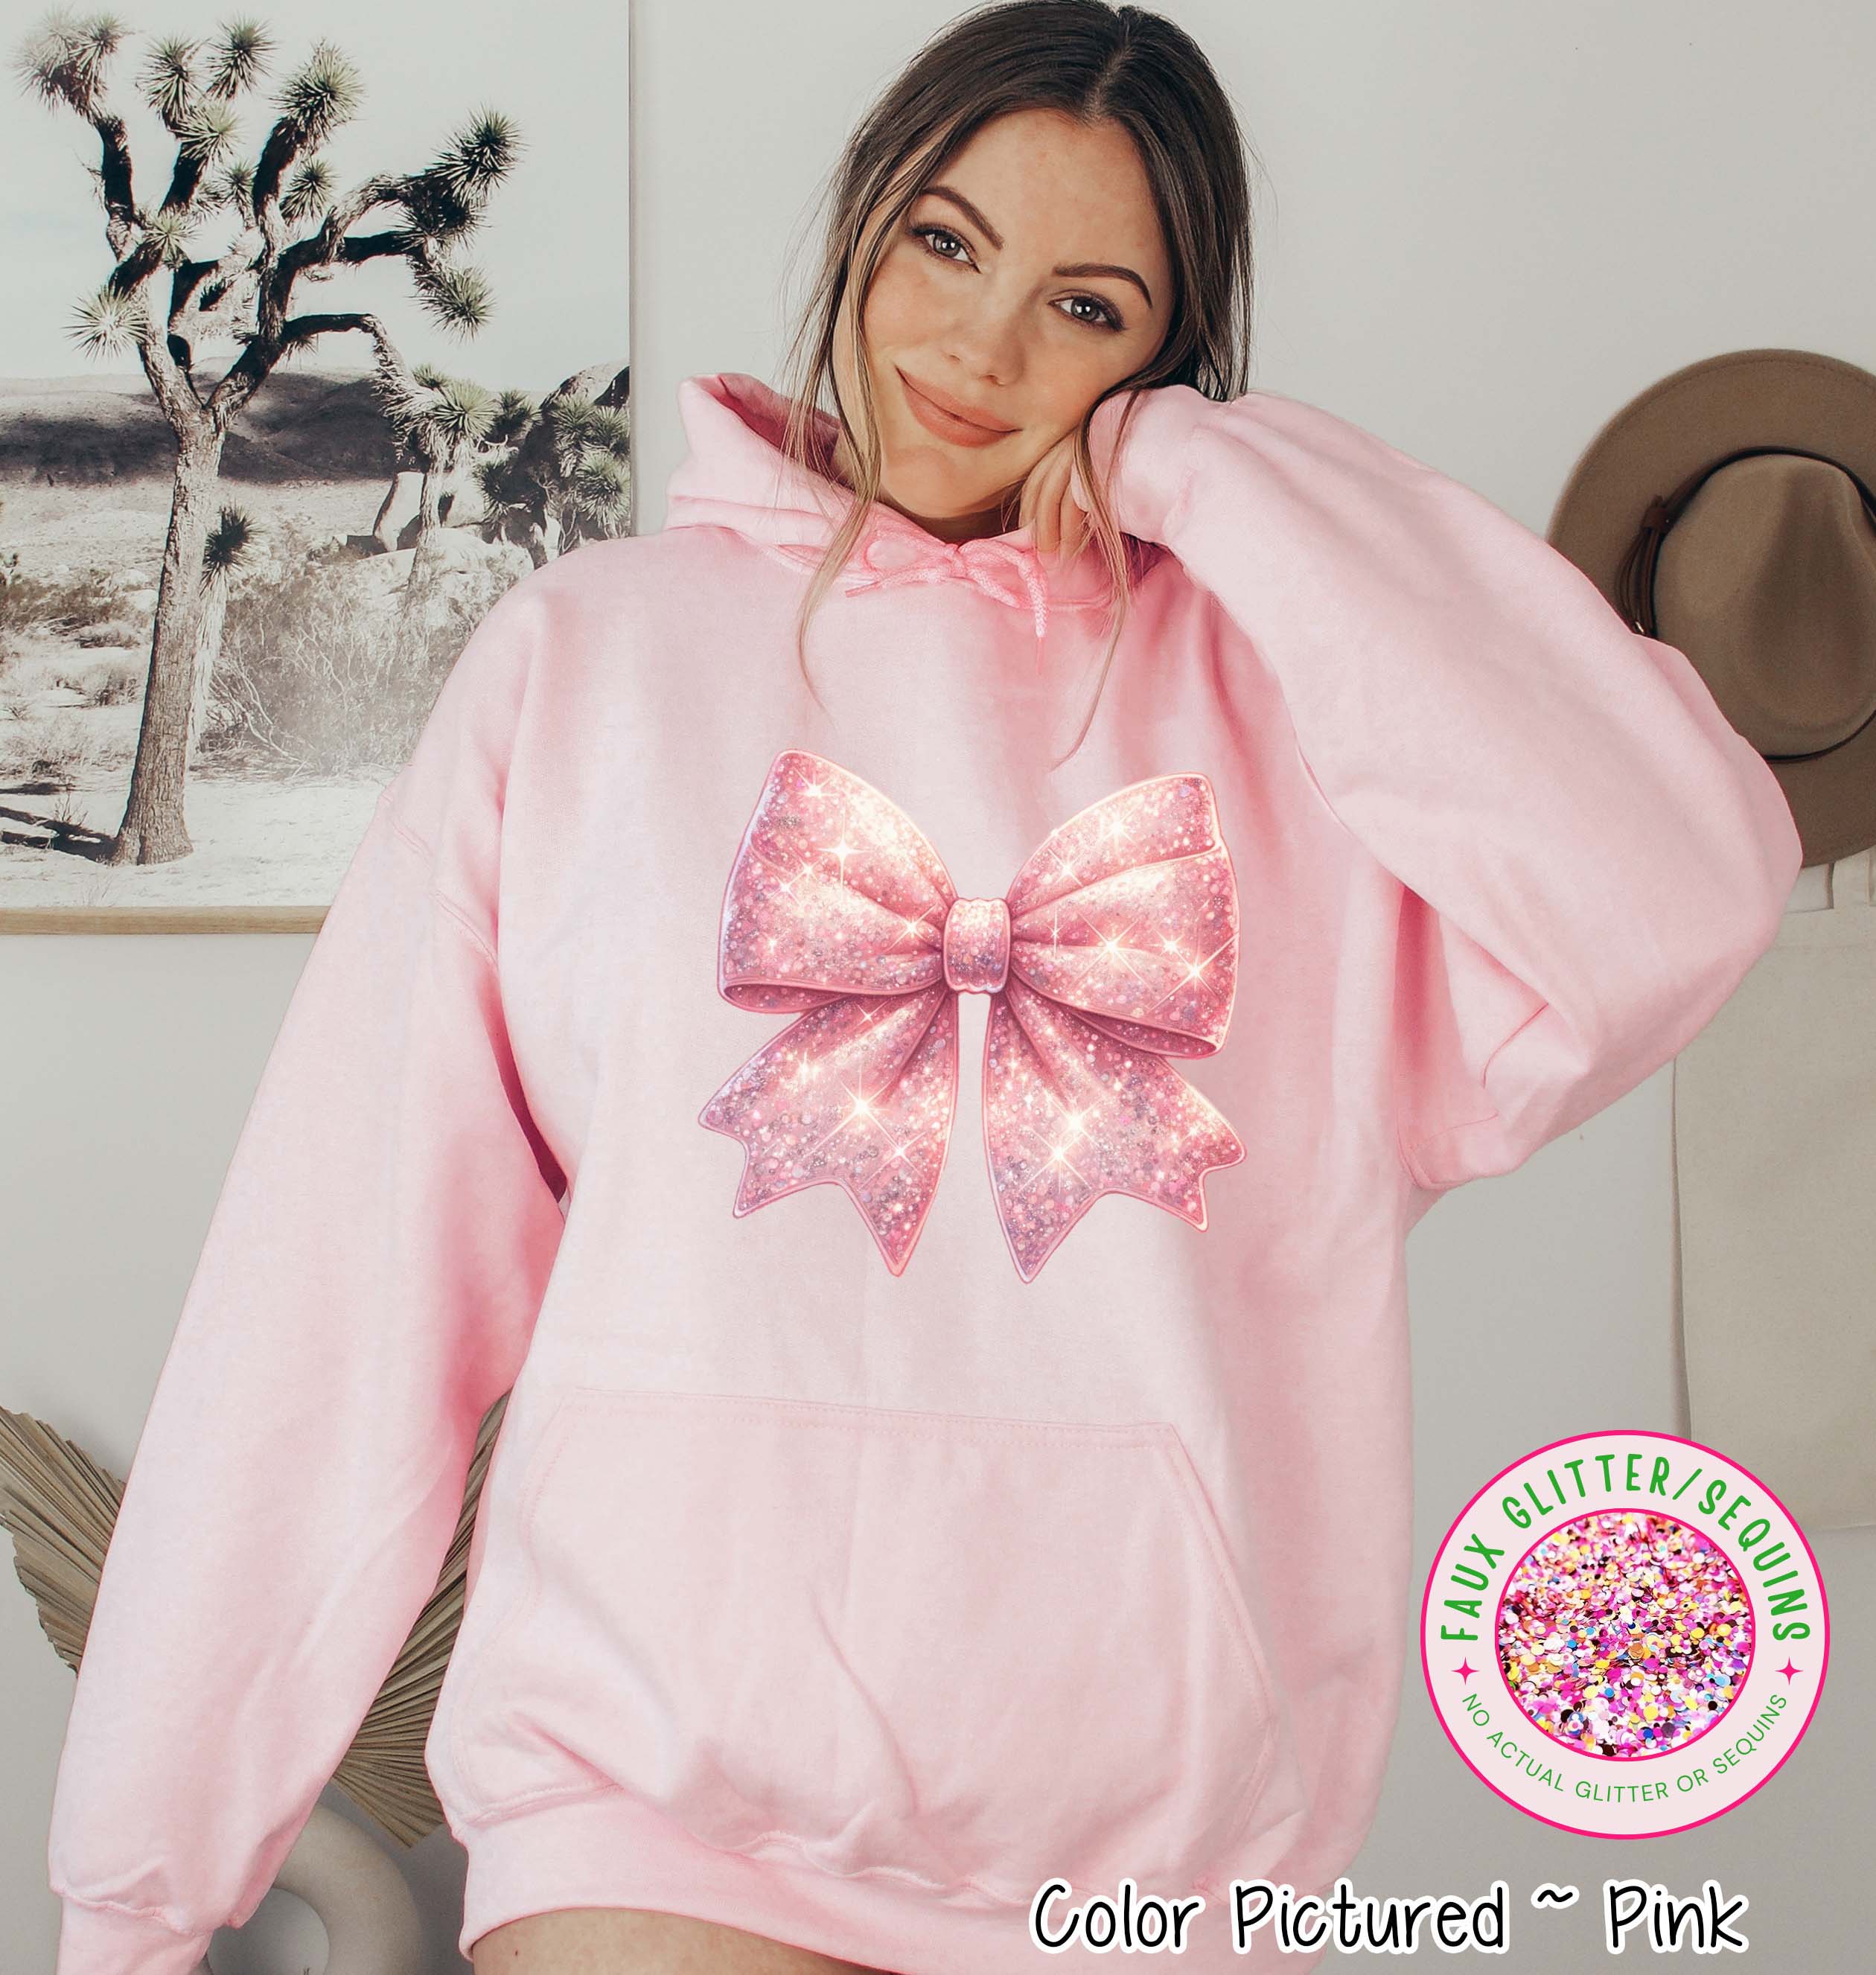 Faux Glitter Coquette Pink Bow Girly Tee and Sweatshirt